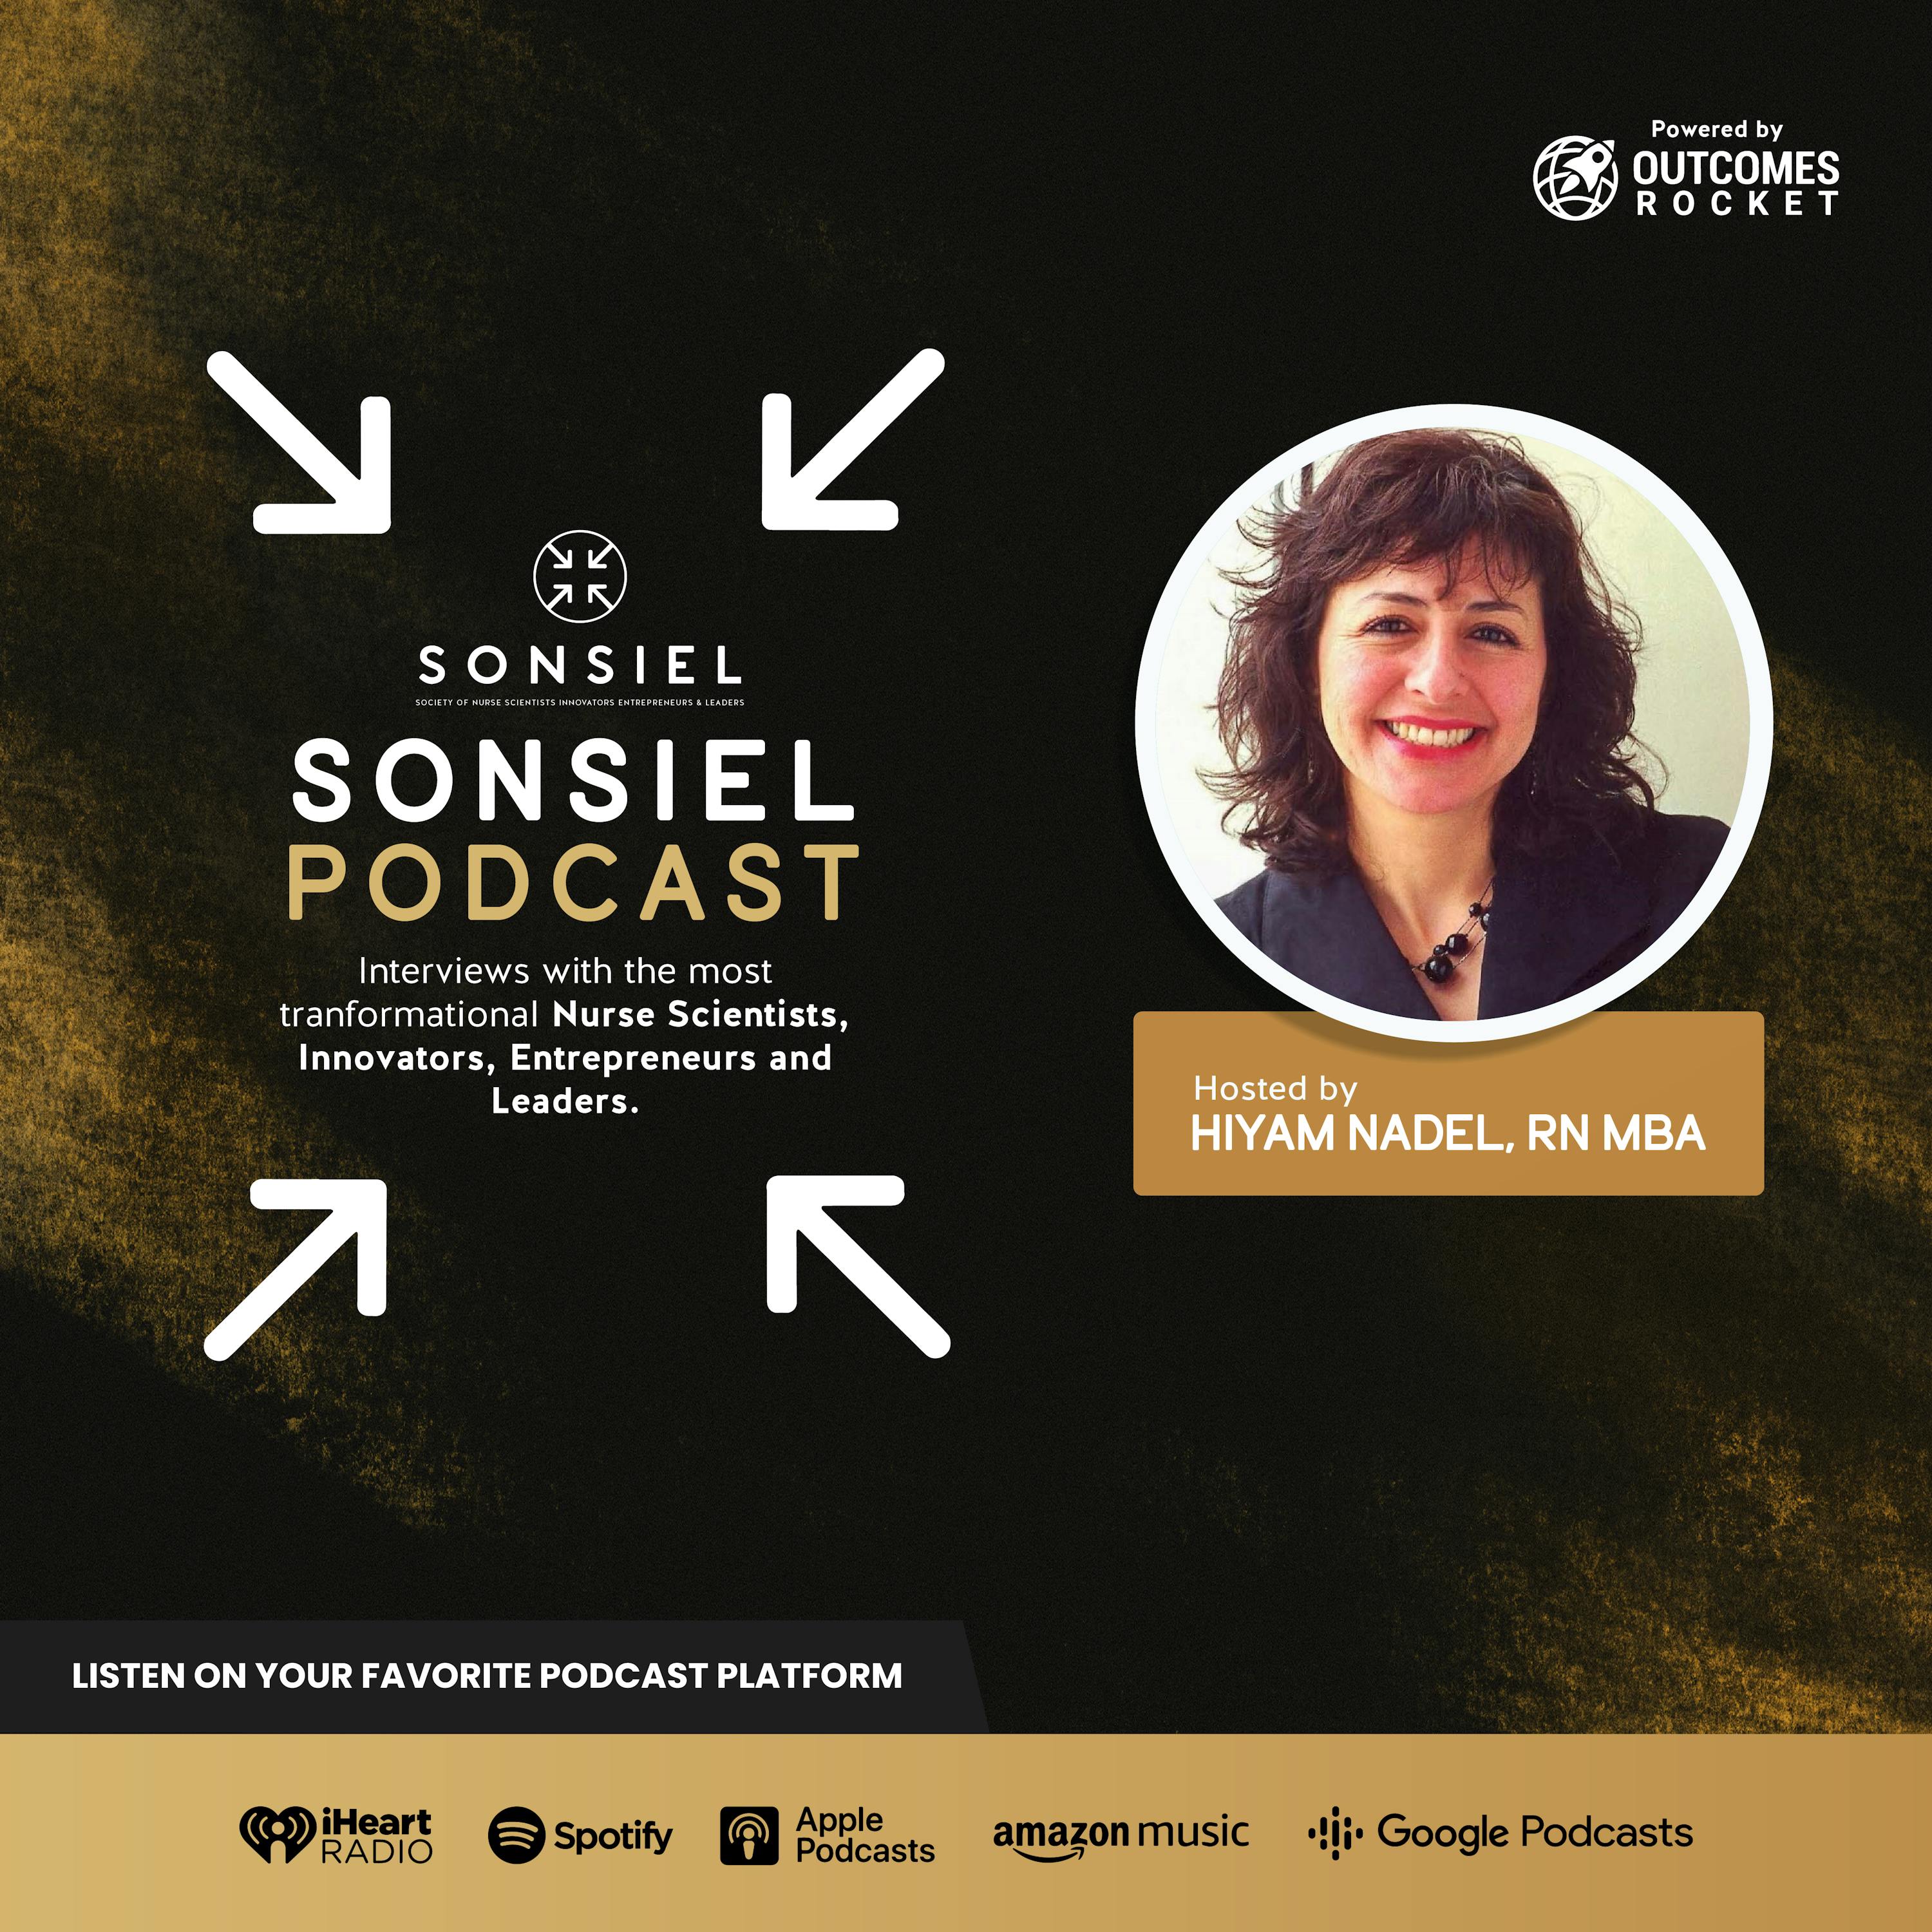 SONSIEL: Navigating Professional Life: Supporting New Nurse Graduates with Jennifer Curran, Director of the Transition to Practice Nursing Program at Mass General Hospital